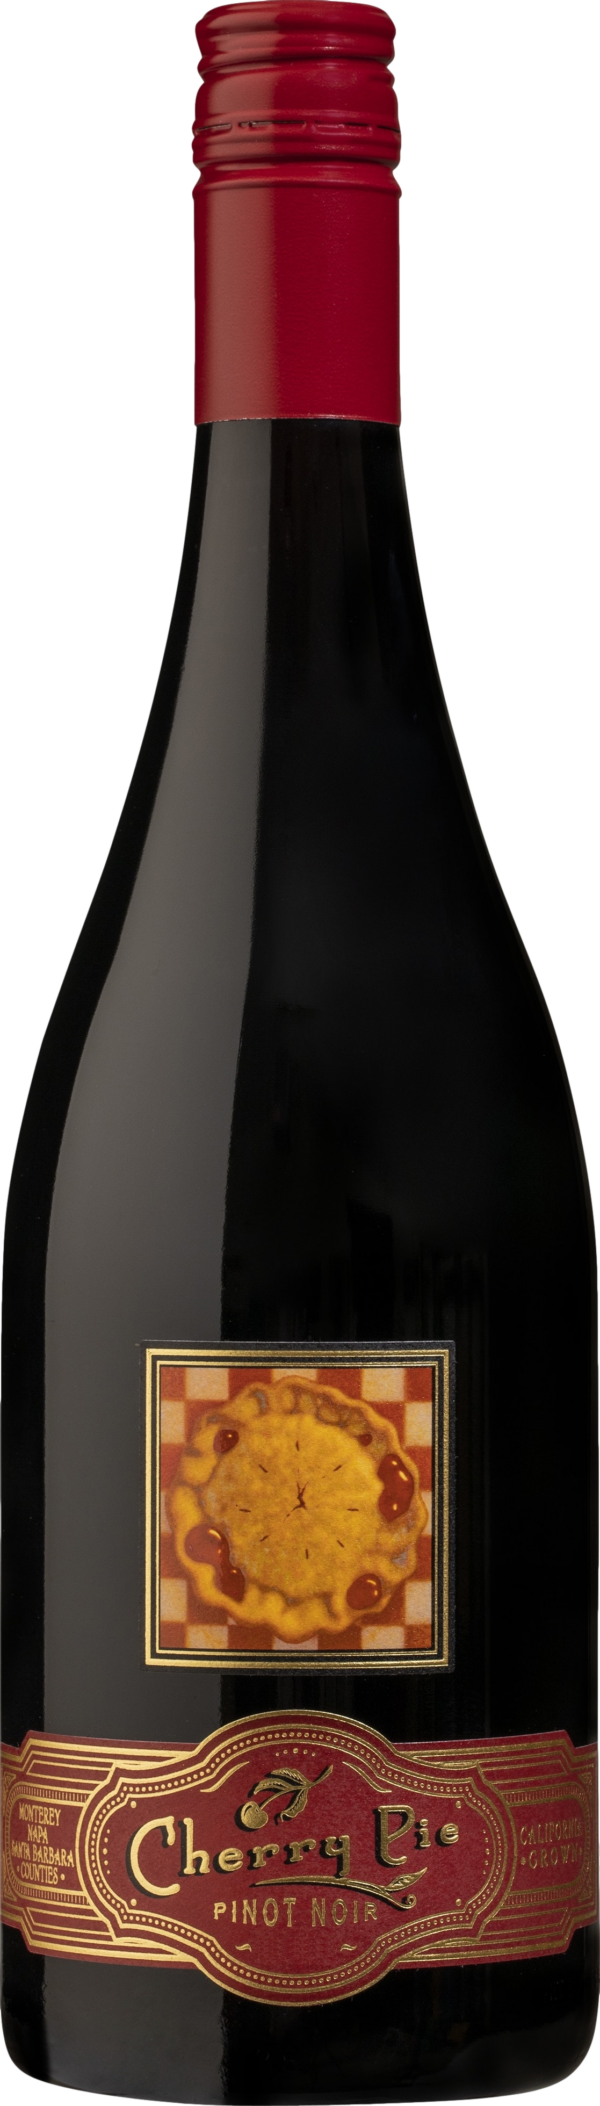 Product image of Cherry Pie Tri County Pinot Noir 2018 from 8wines